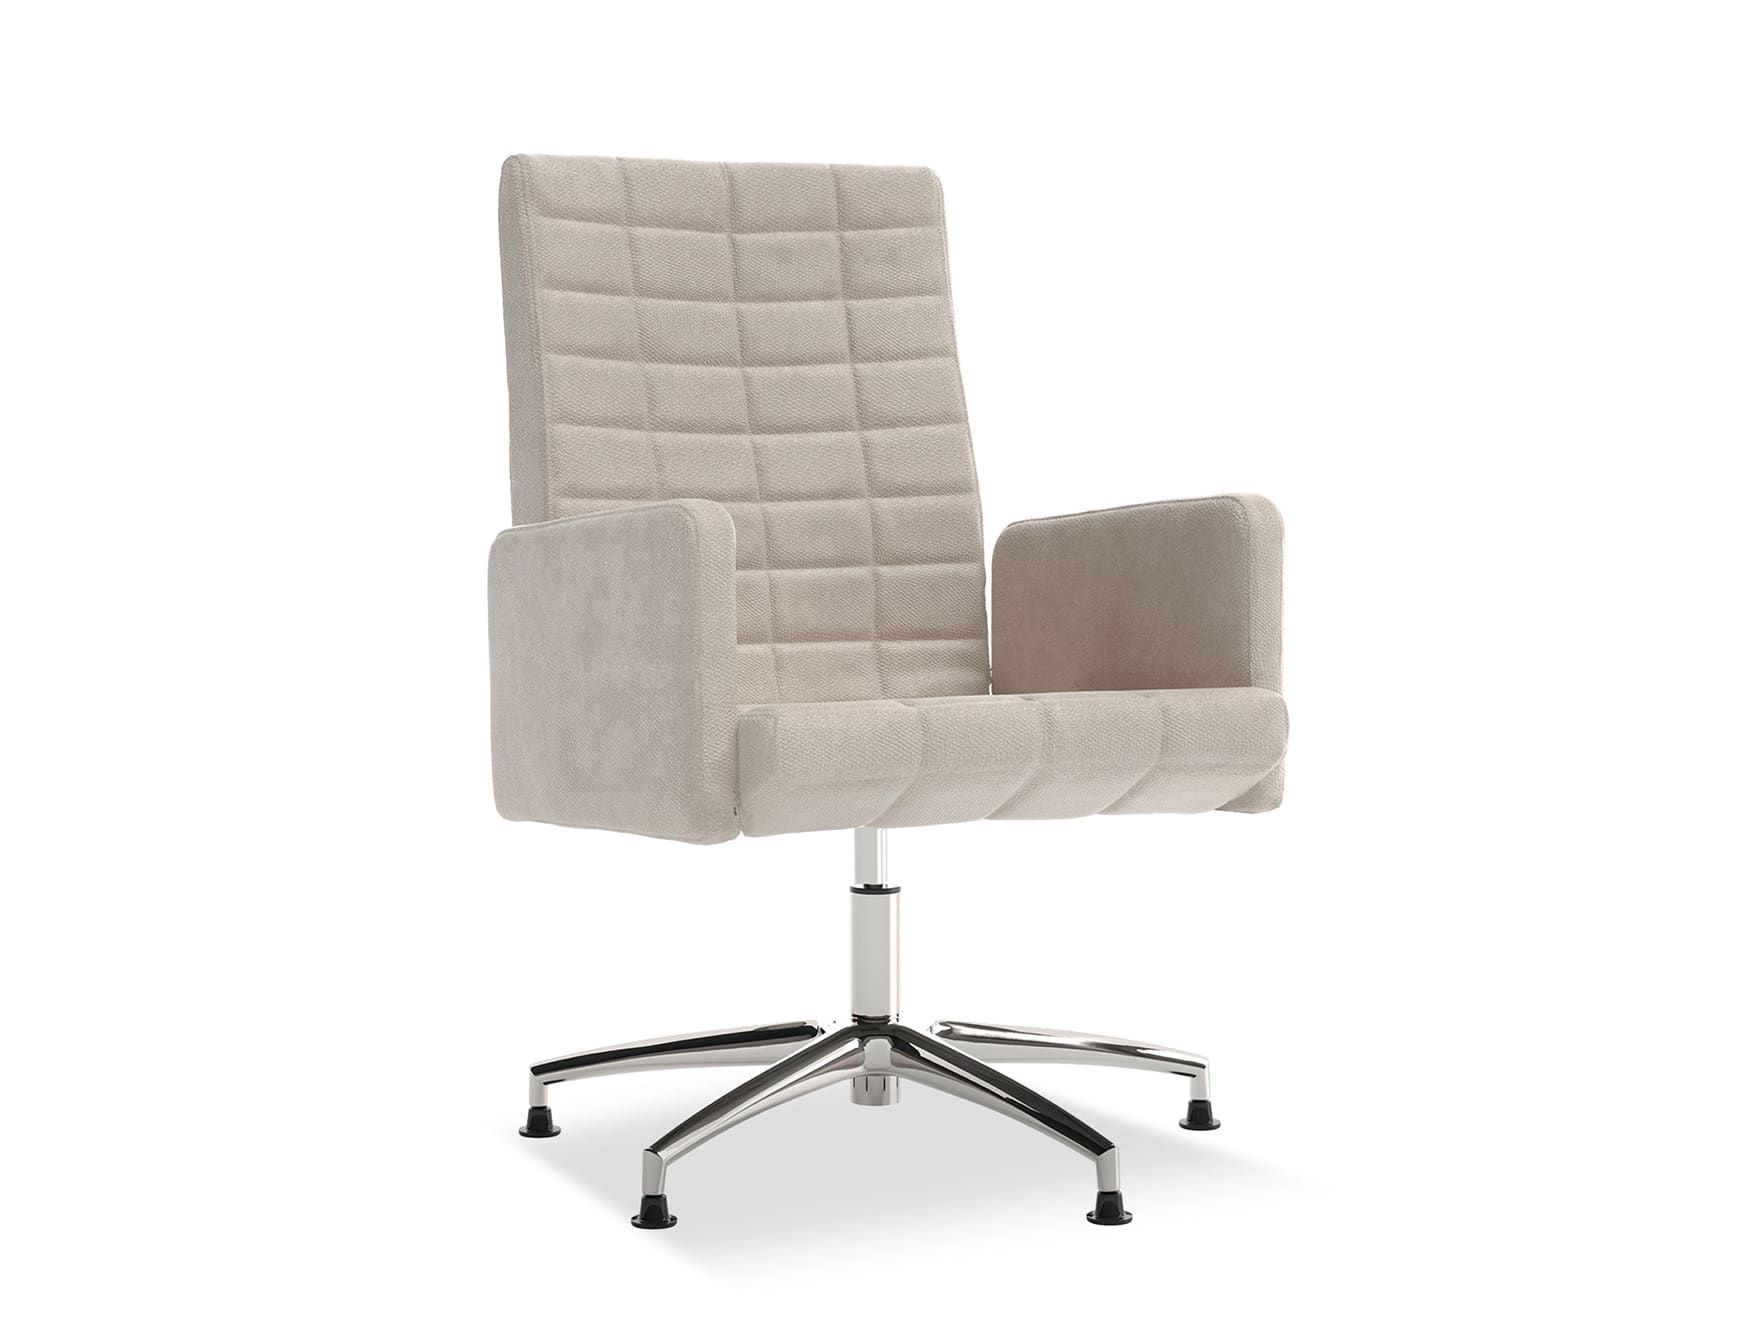 Explorer L contemporary Italian office chair with biege fabric